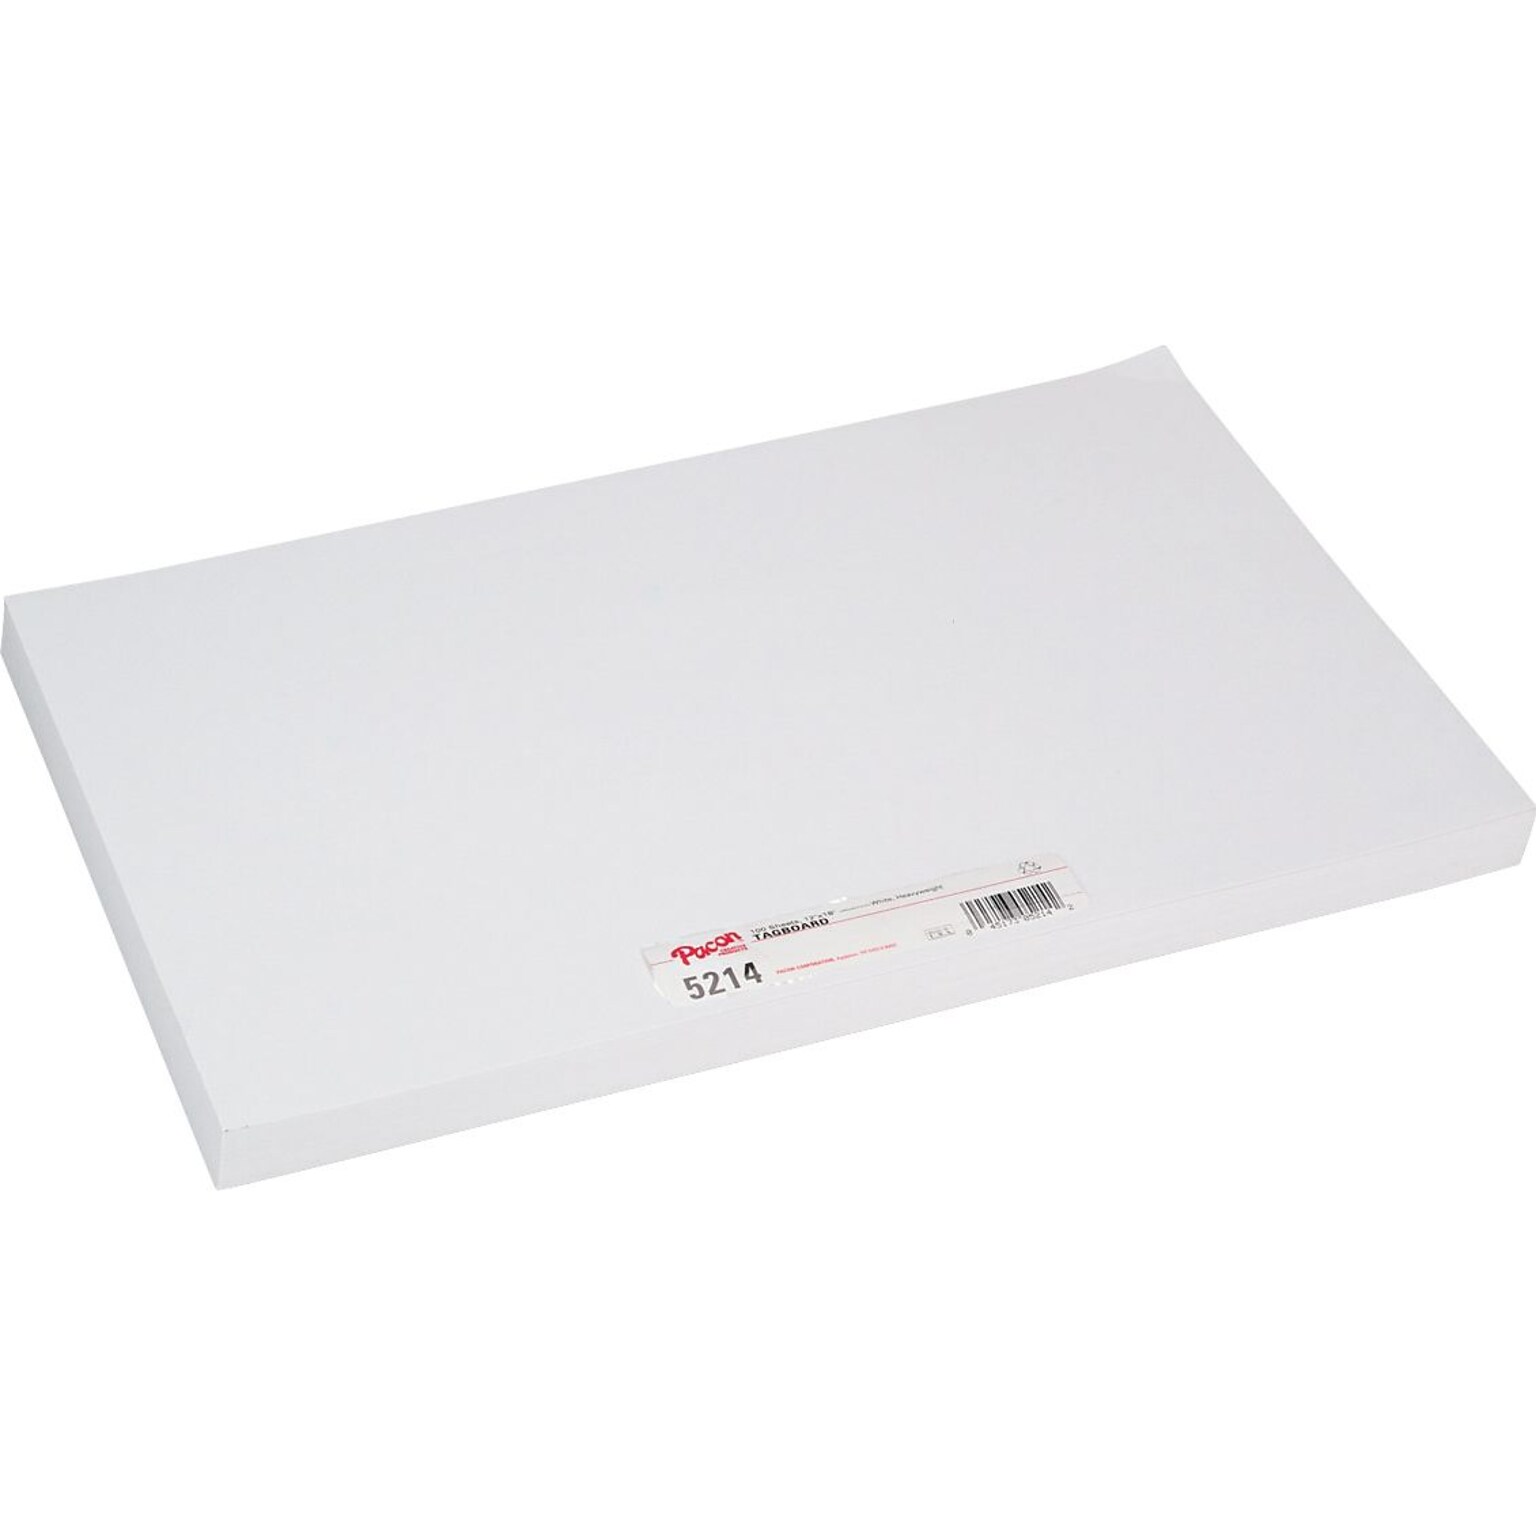 Pacon White Tagboard, Heavyweight, 12W x 18H, 100 Sheets/Pack (5214)